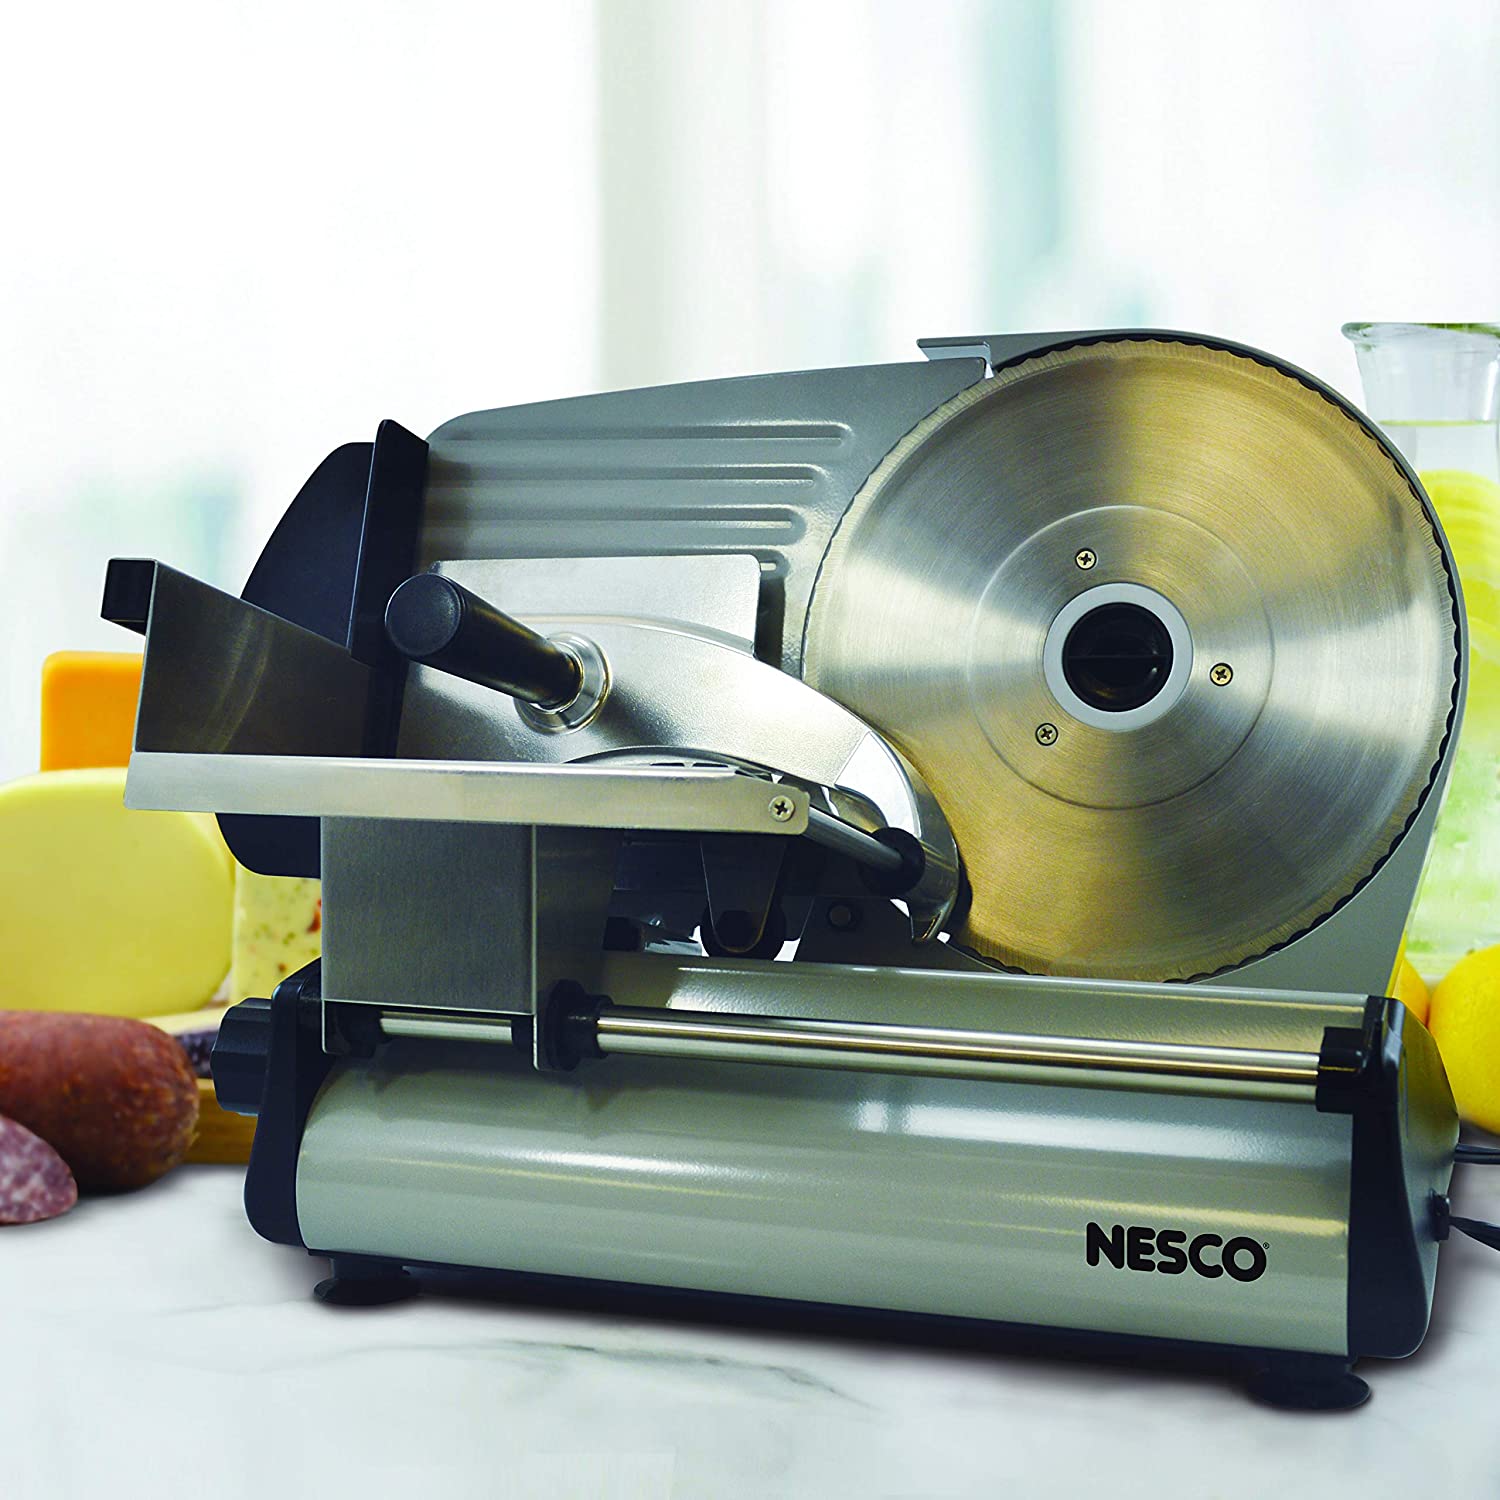 NESCO 8.7" Stainless Steel Electric Meat Slicer